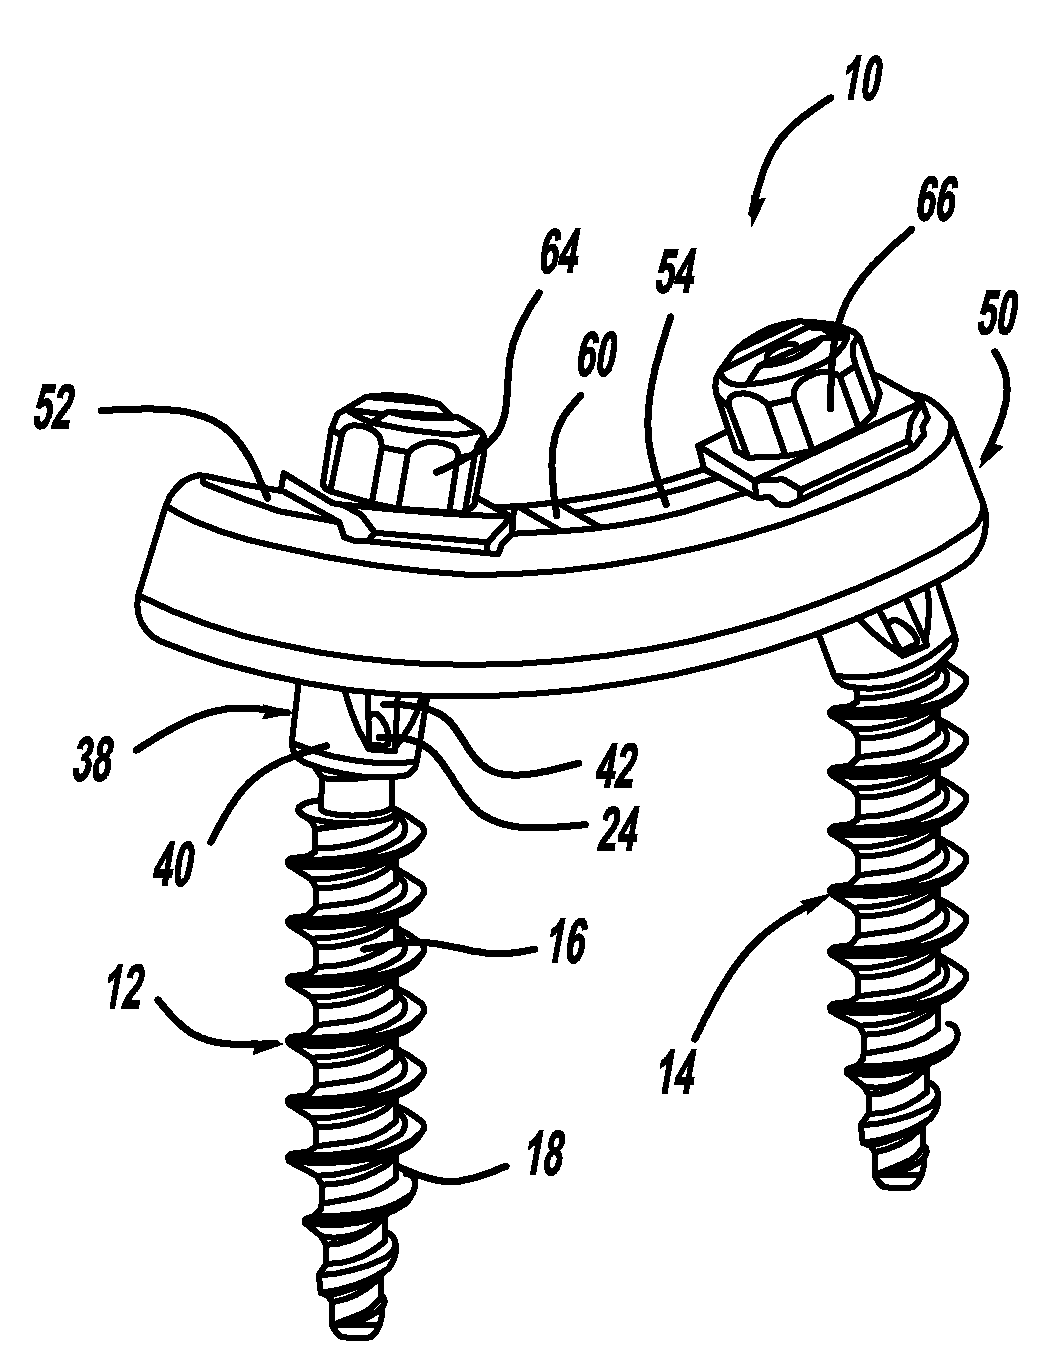 Pedicle Screw and Rod System